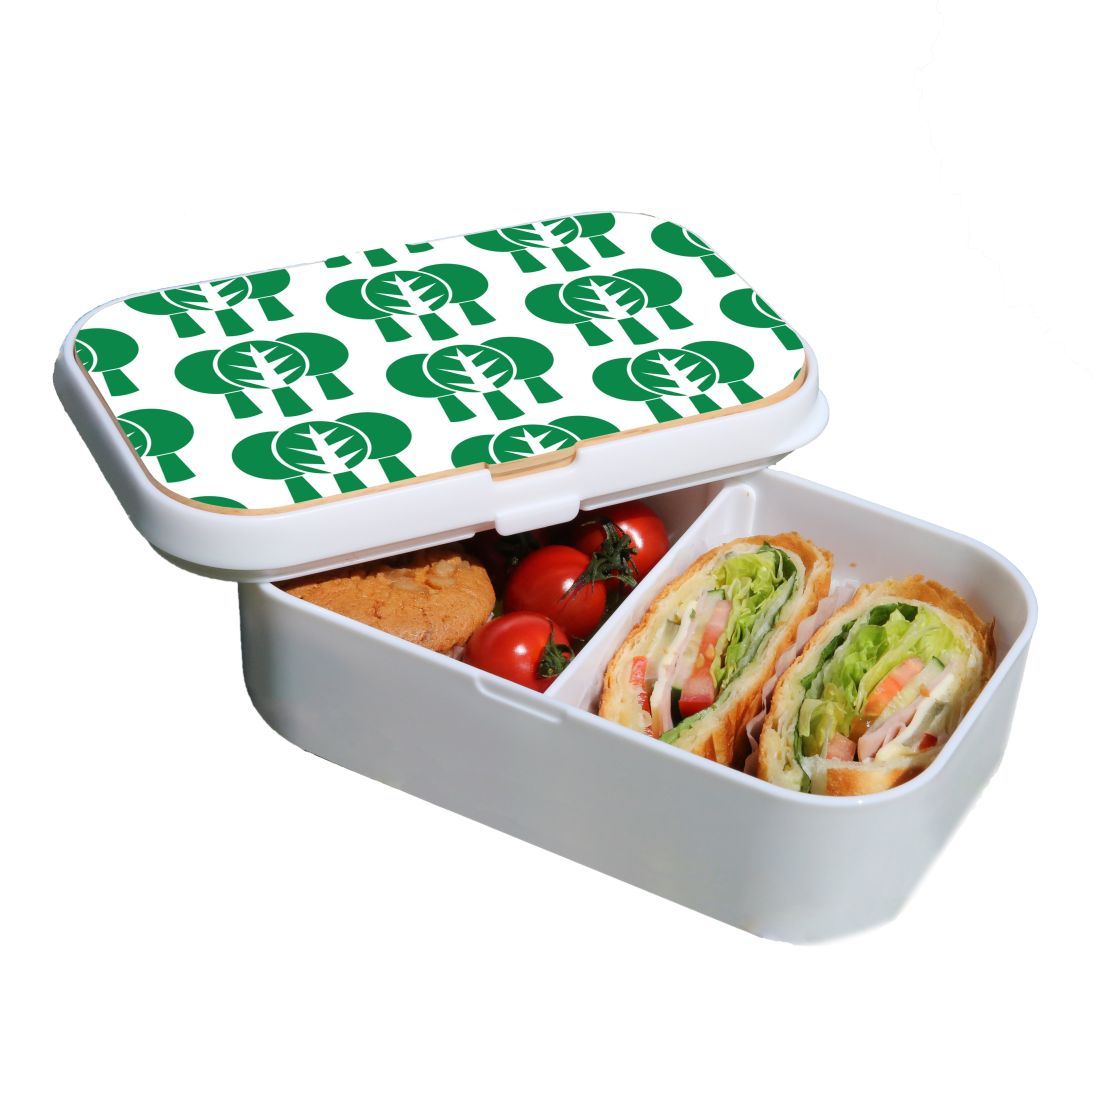 Lunch Box Food Container Picnic Authentic Wood Strap Cutlery Green Tree Pattern